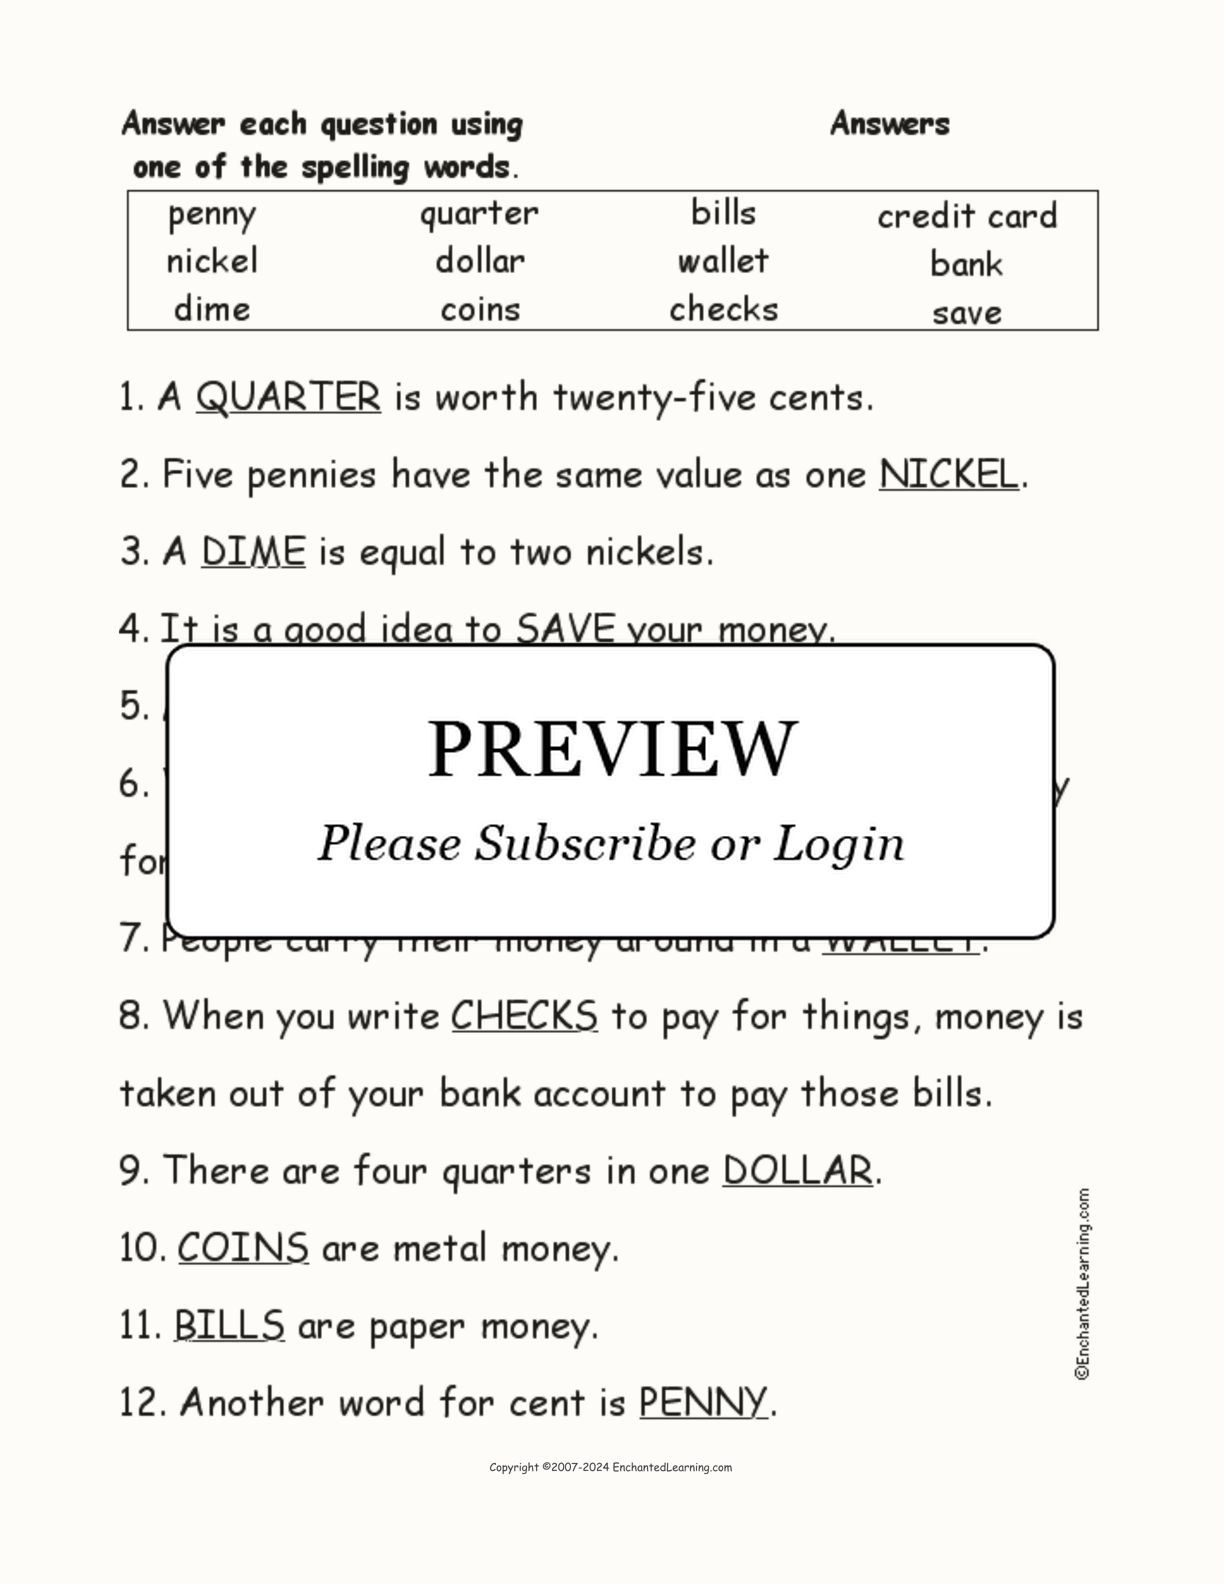 US Money: Spelling Word Questions interactive worksheet page 2